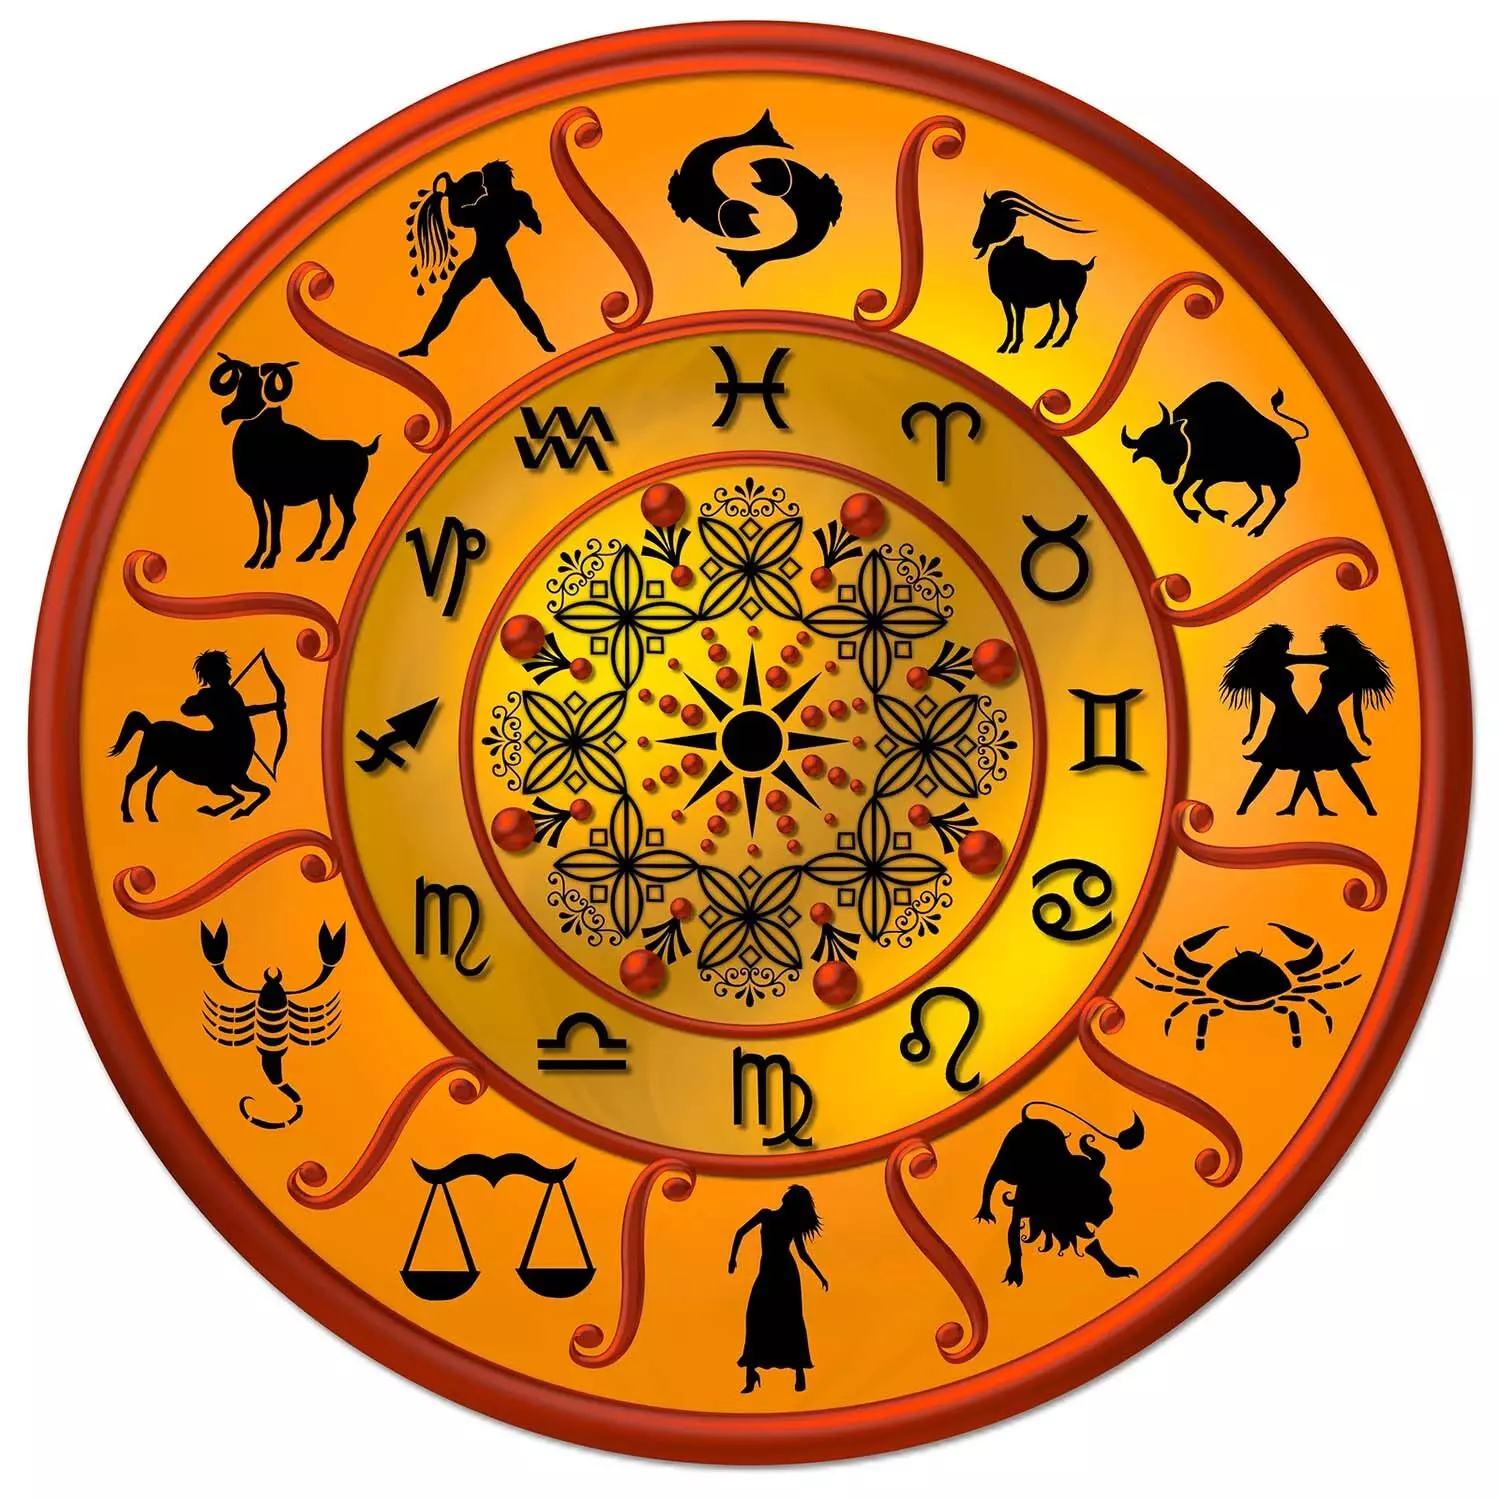 13 July – Know your todays horoscope